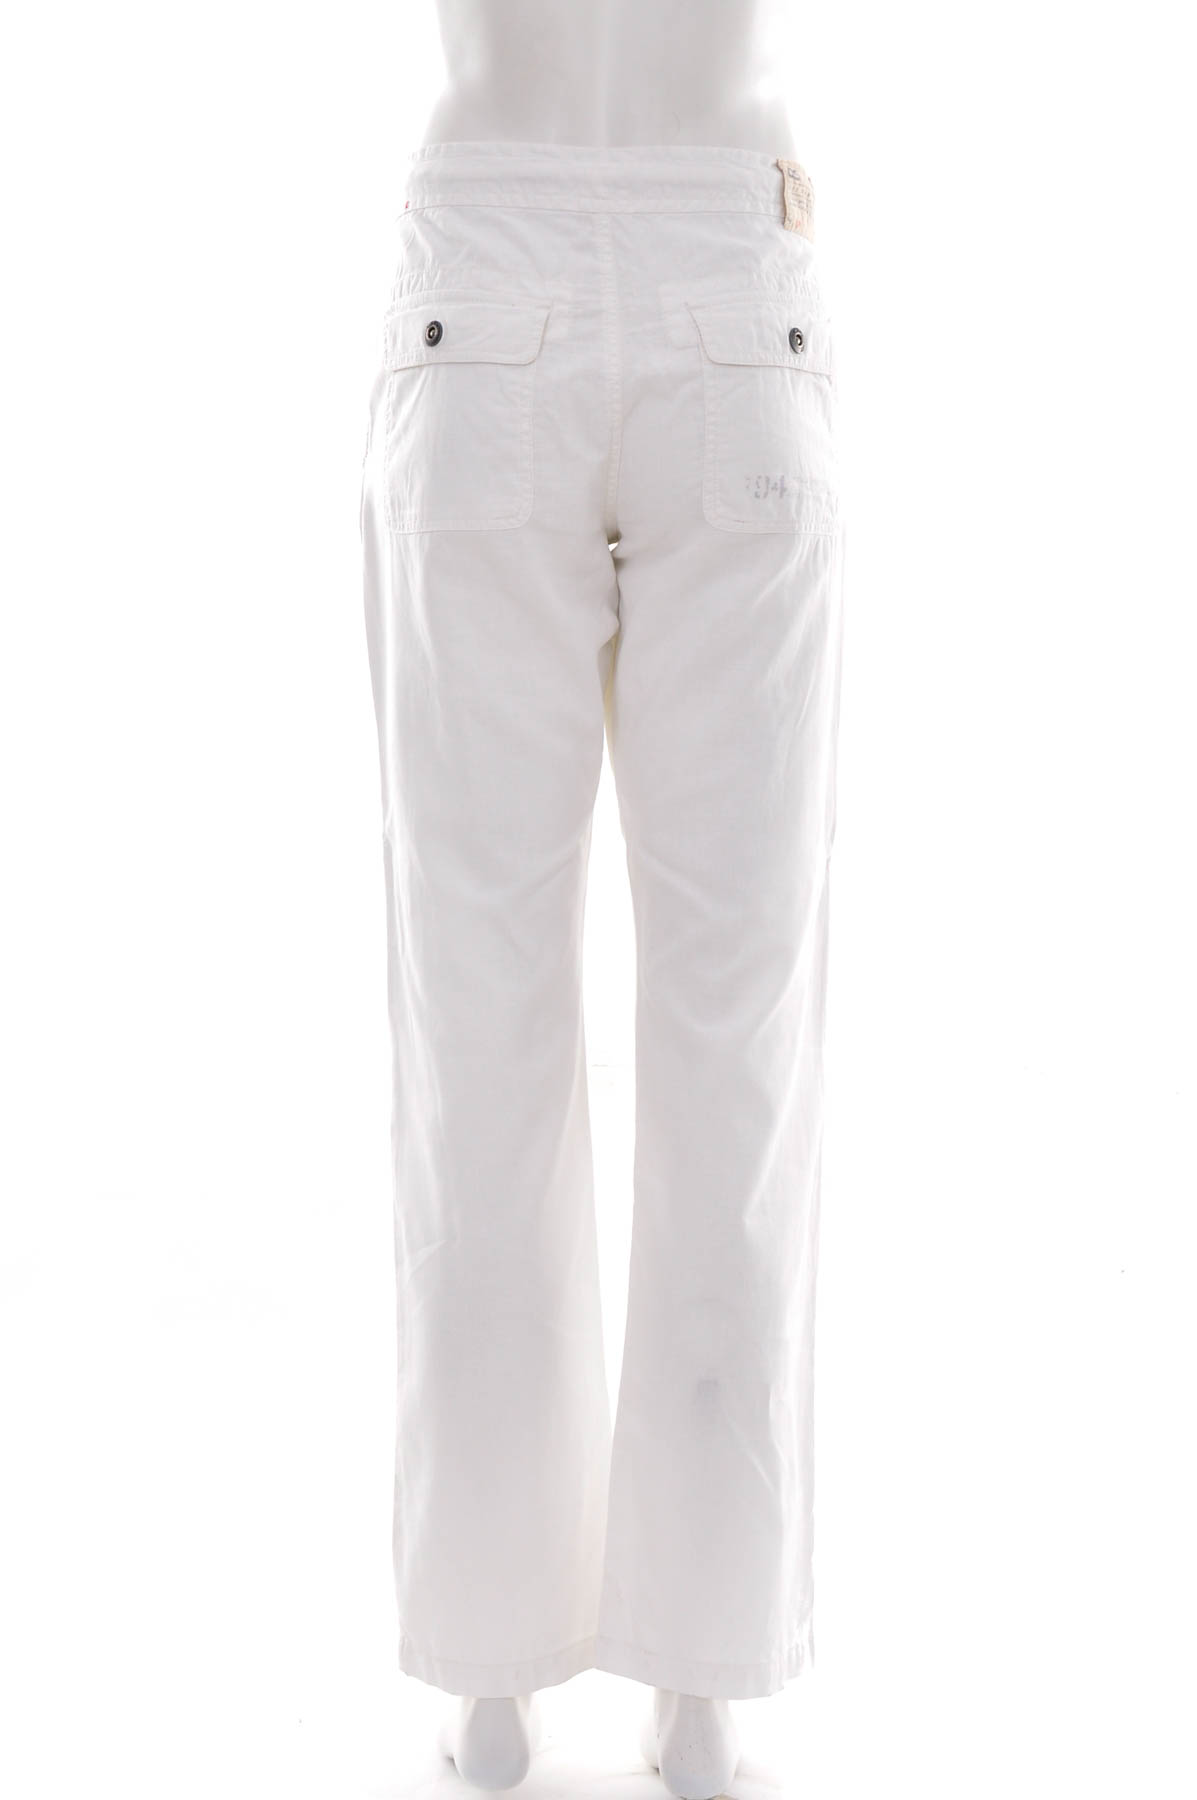 Men's trousers - QS by S.Oliver - 1